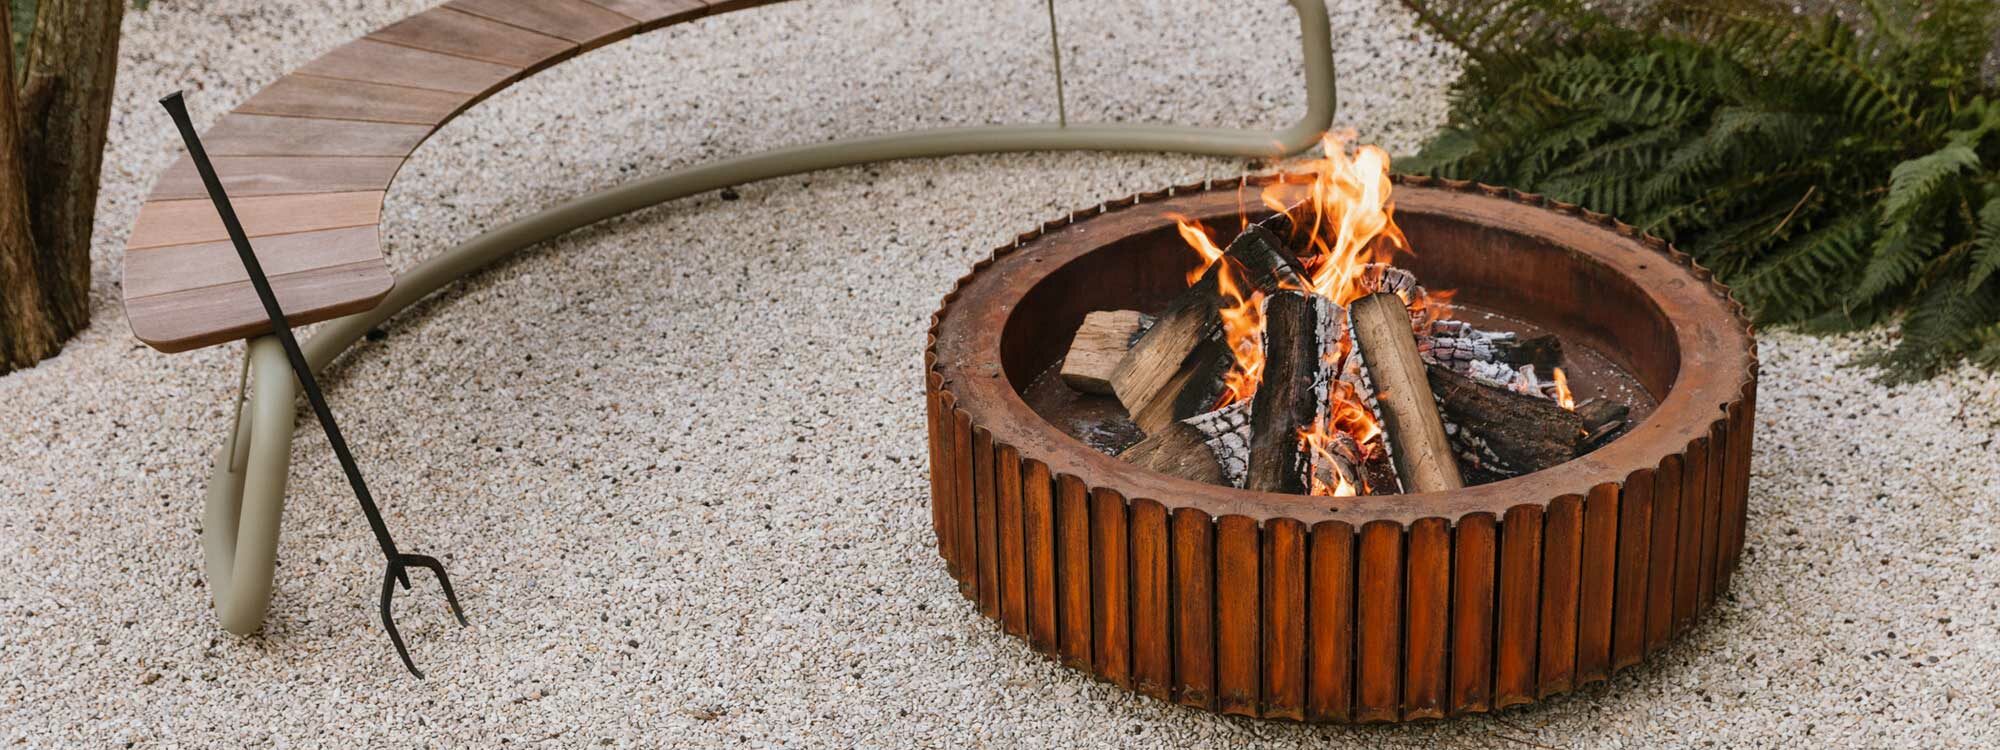 Image of The Ring corten steel fire pit and The Circle circular garden bench by Wünder, Belgium.